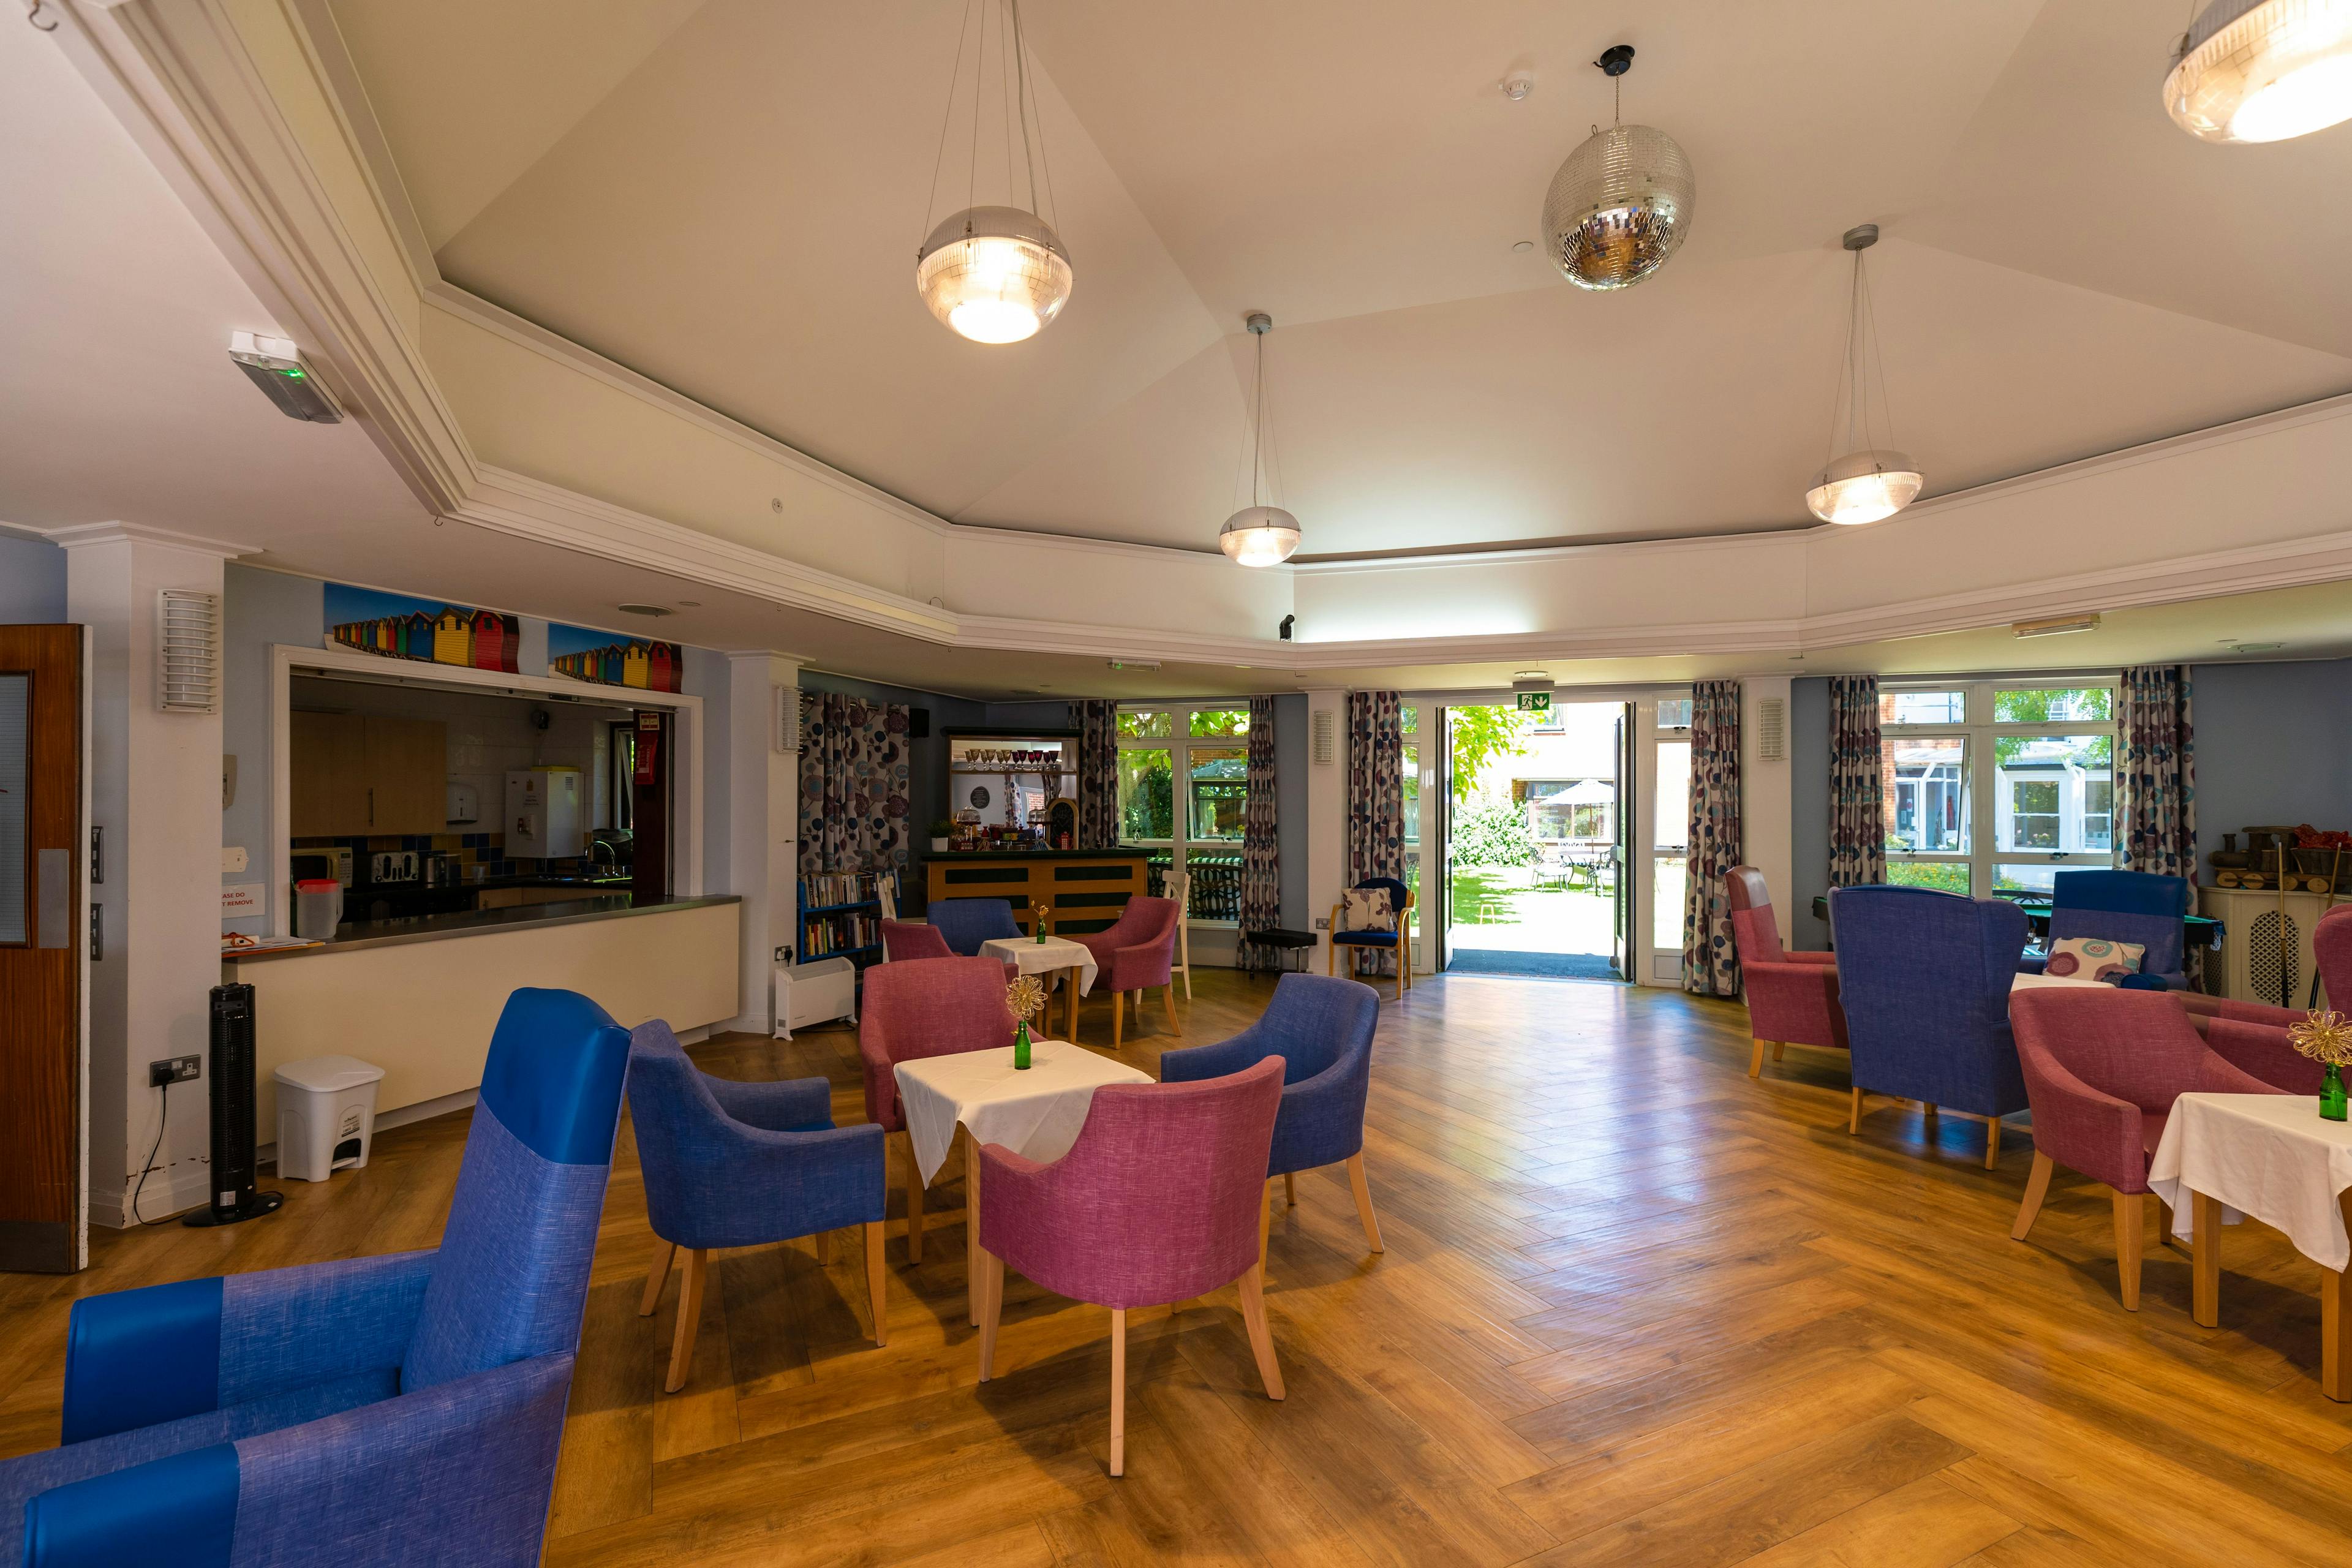 The Whitgift Foundation - Whitgift House care home 2